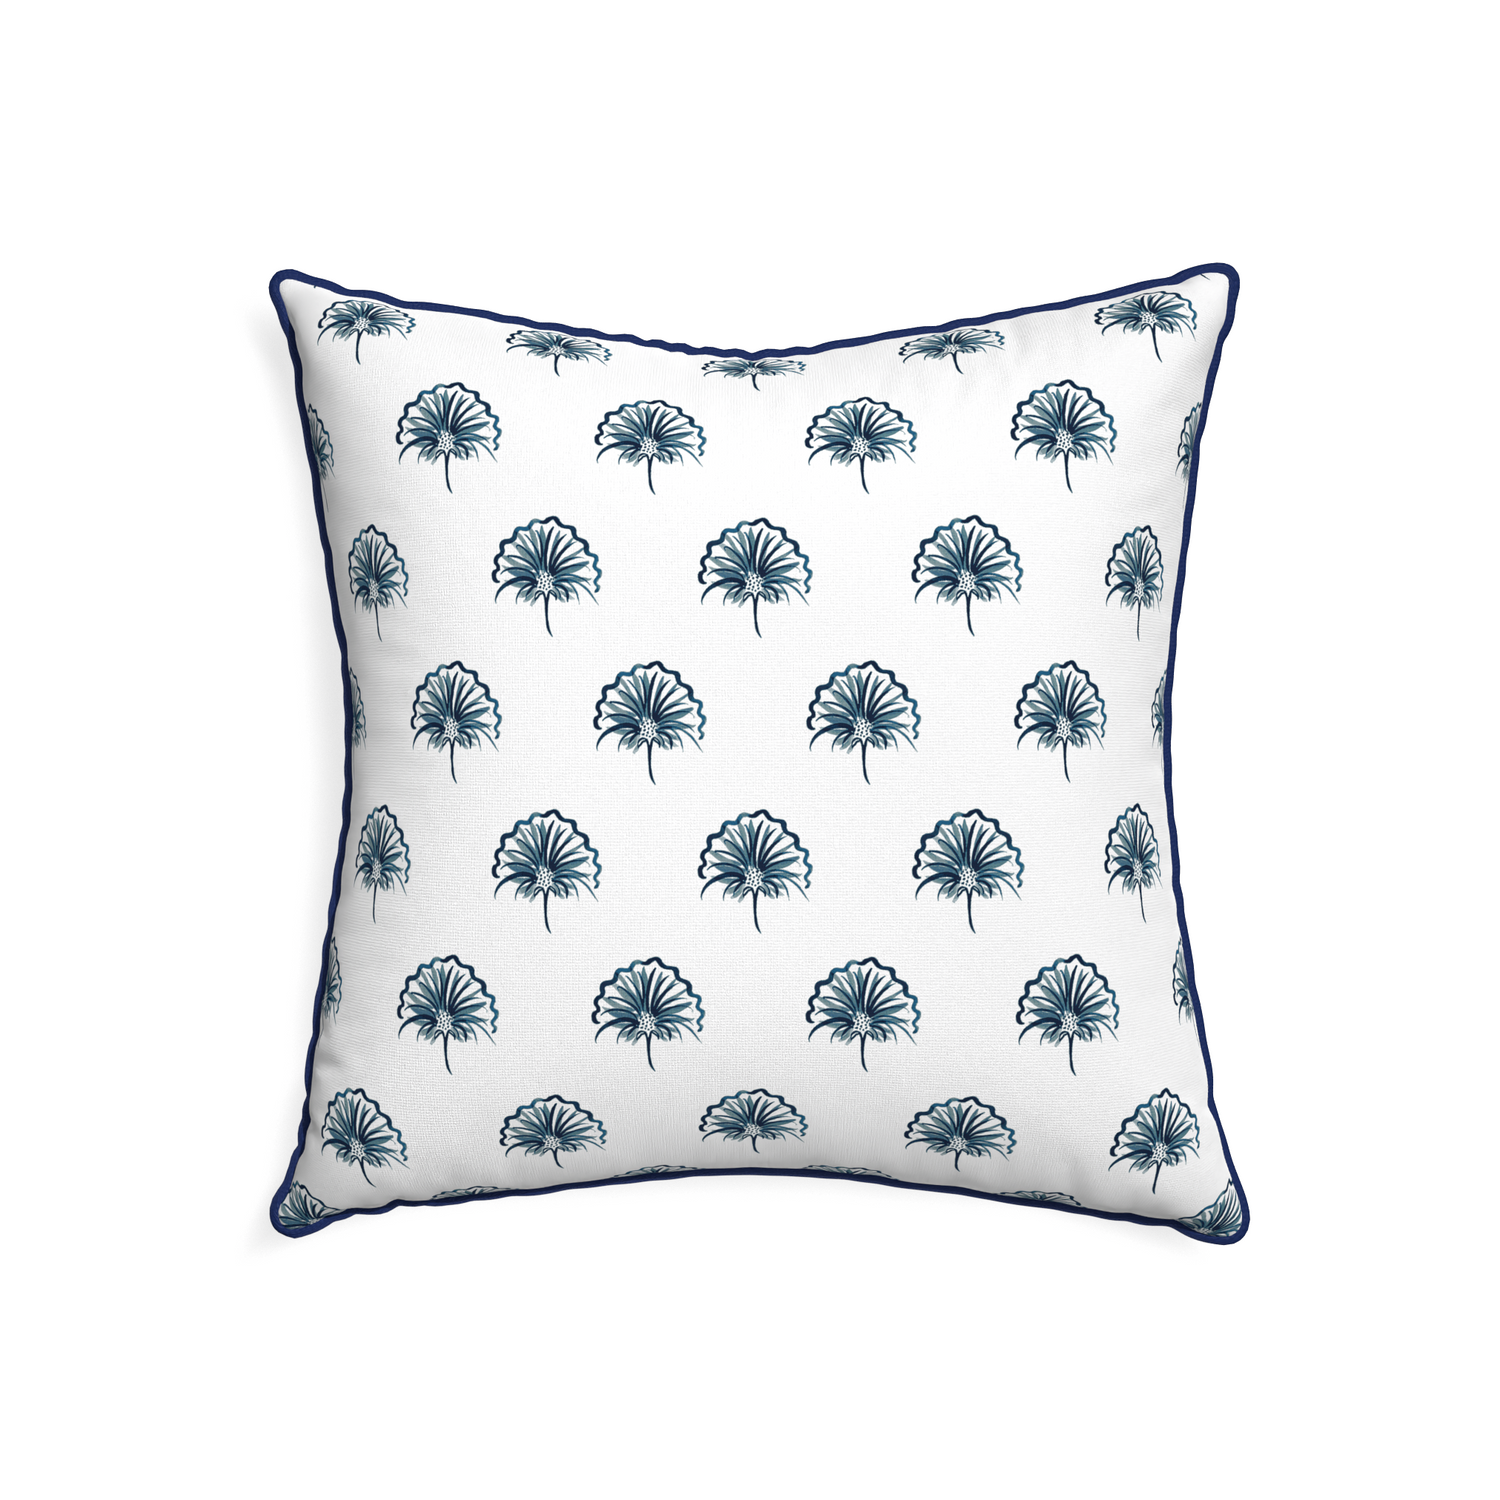 22-square penelope midnight custom floral navypillow with midnight piping on white background